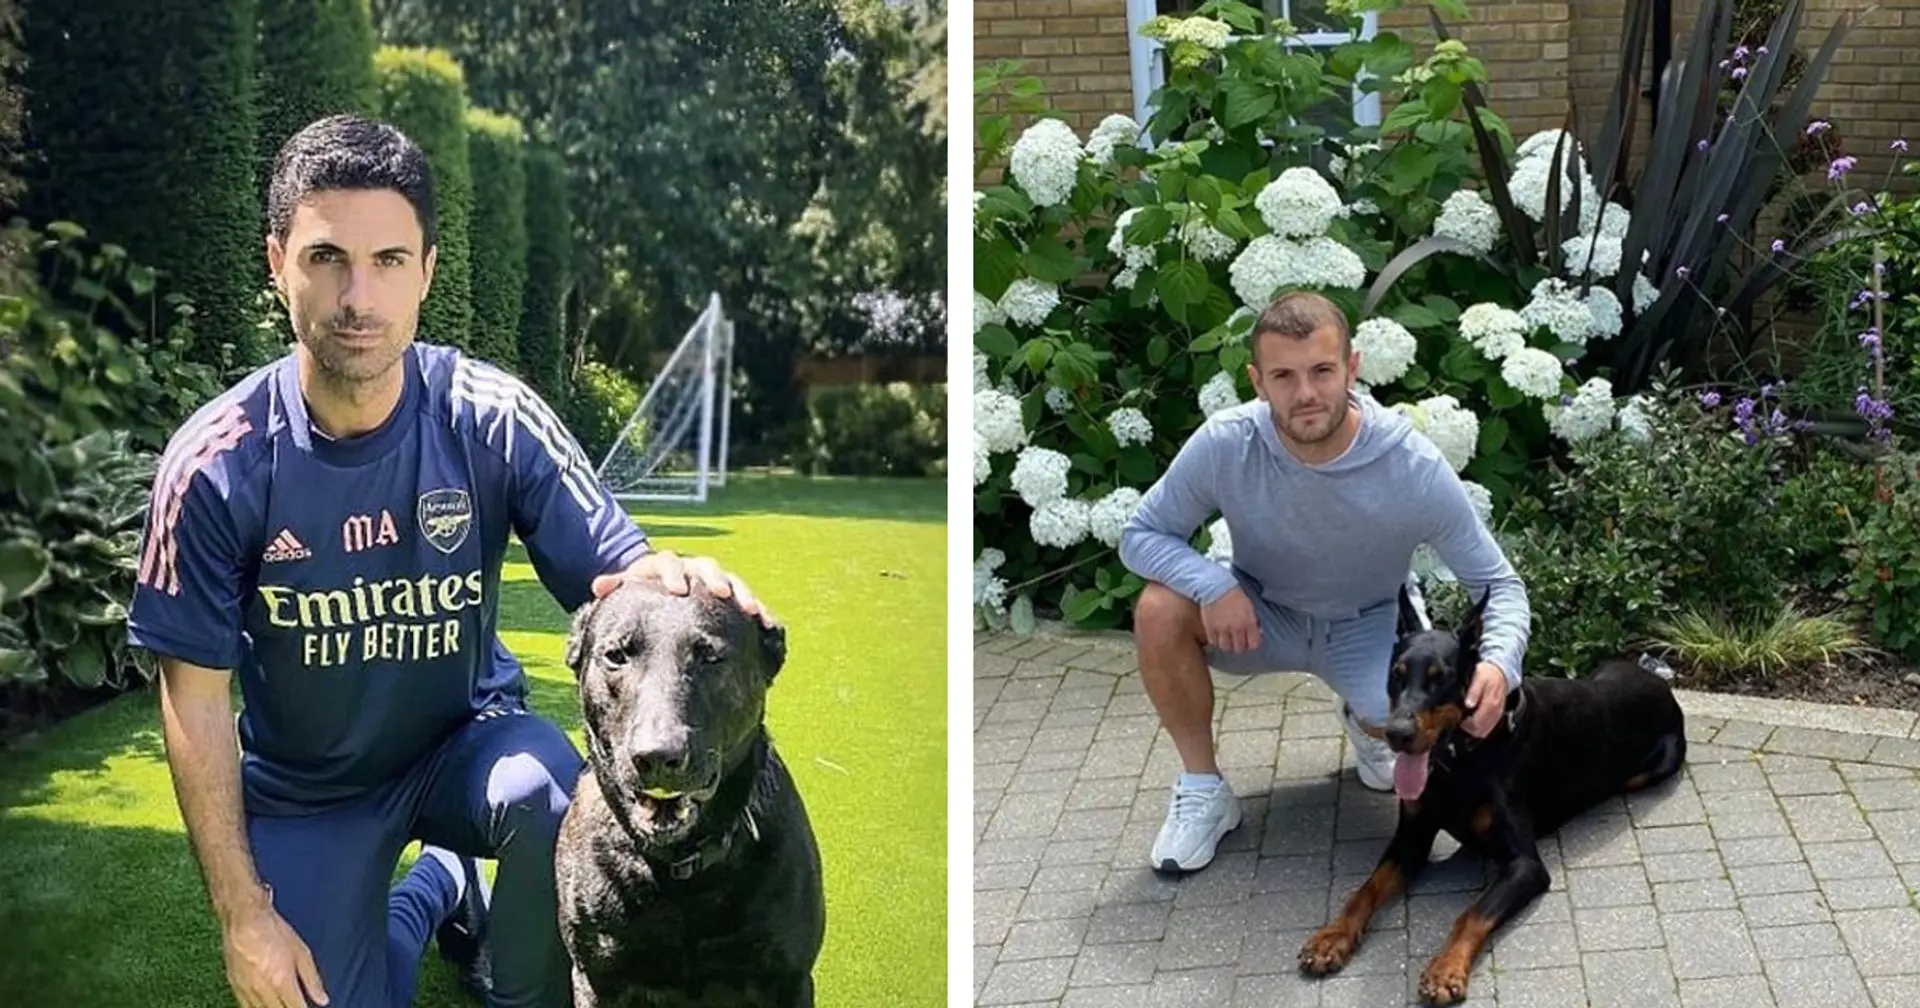 Arteta follows Wilshere's lead as he spends £20,000 on guard dog to protect his home